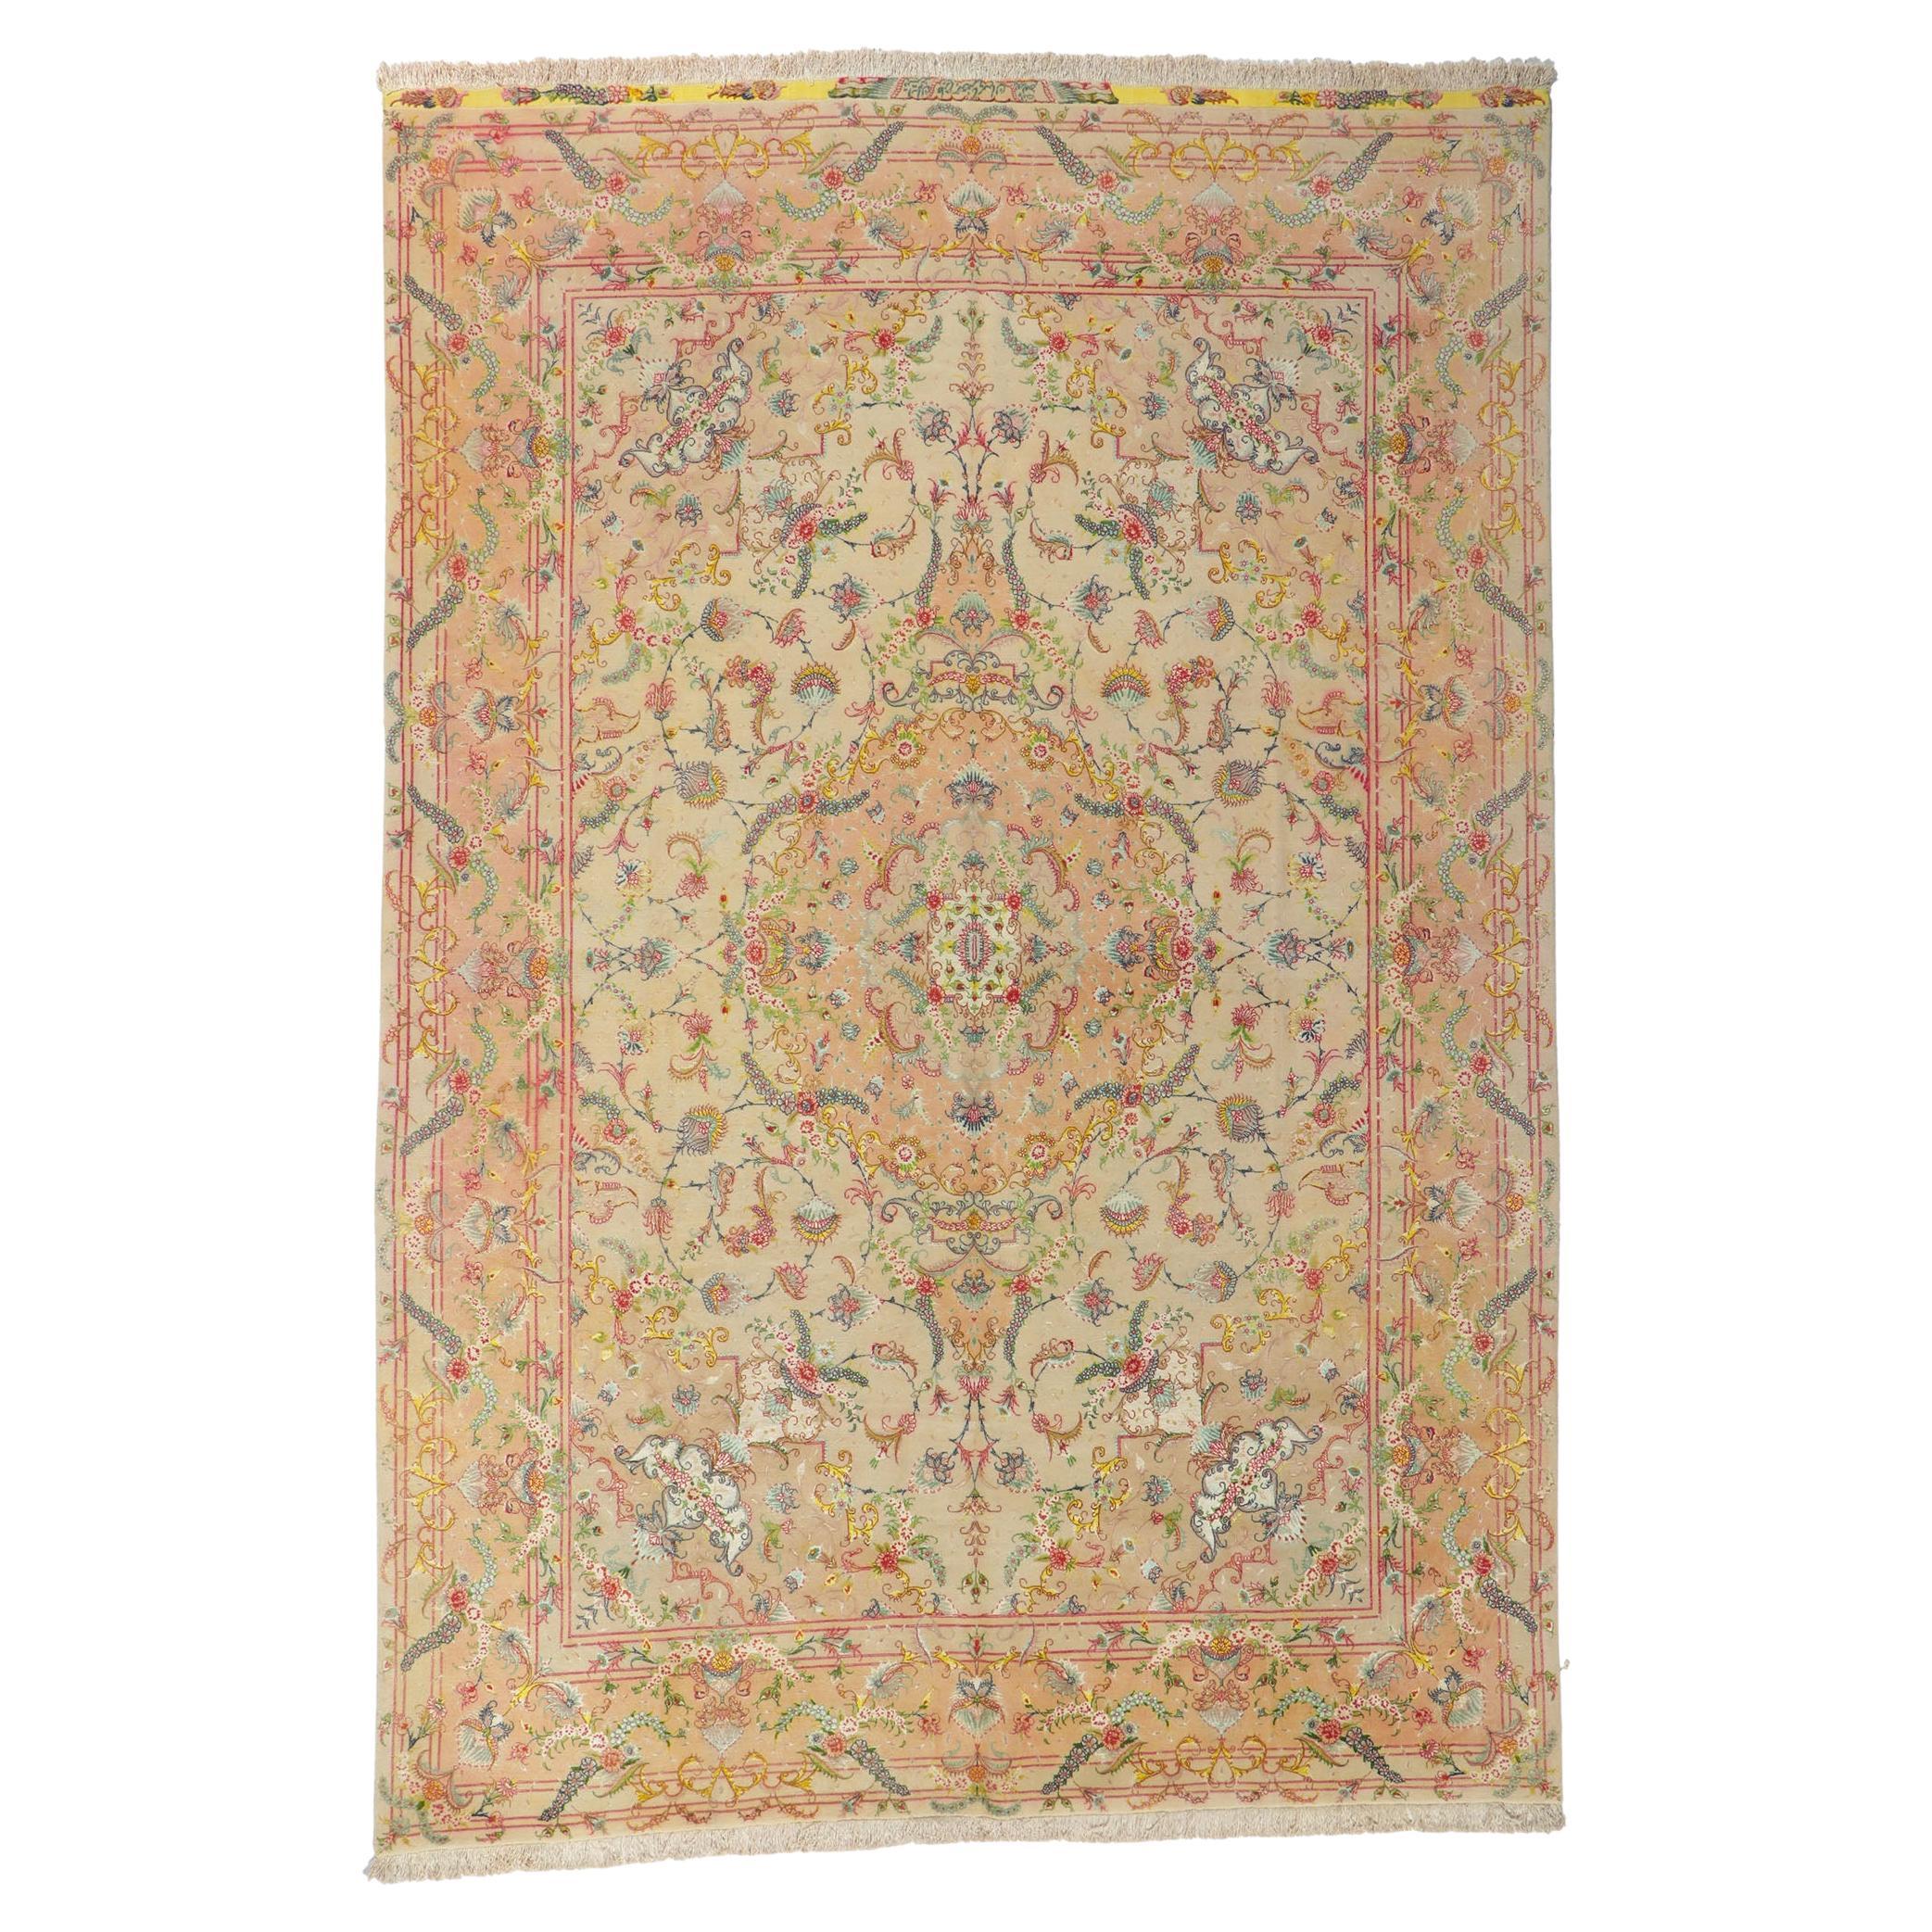 How much is a silk Persian rug?